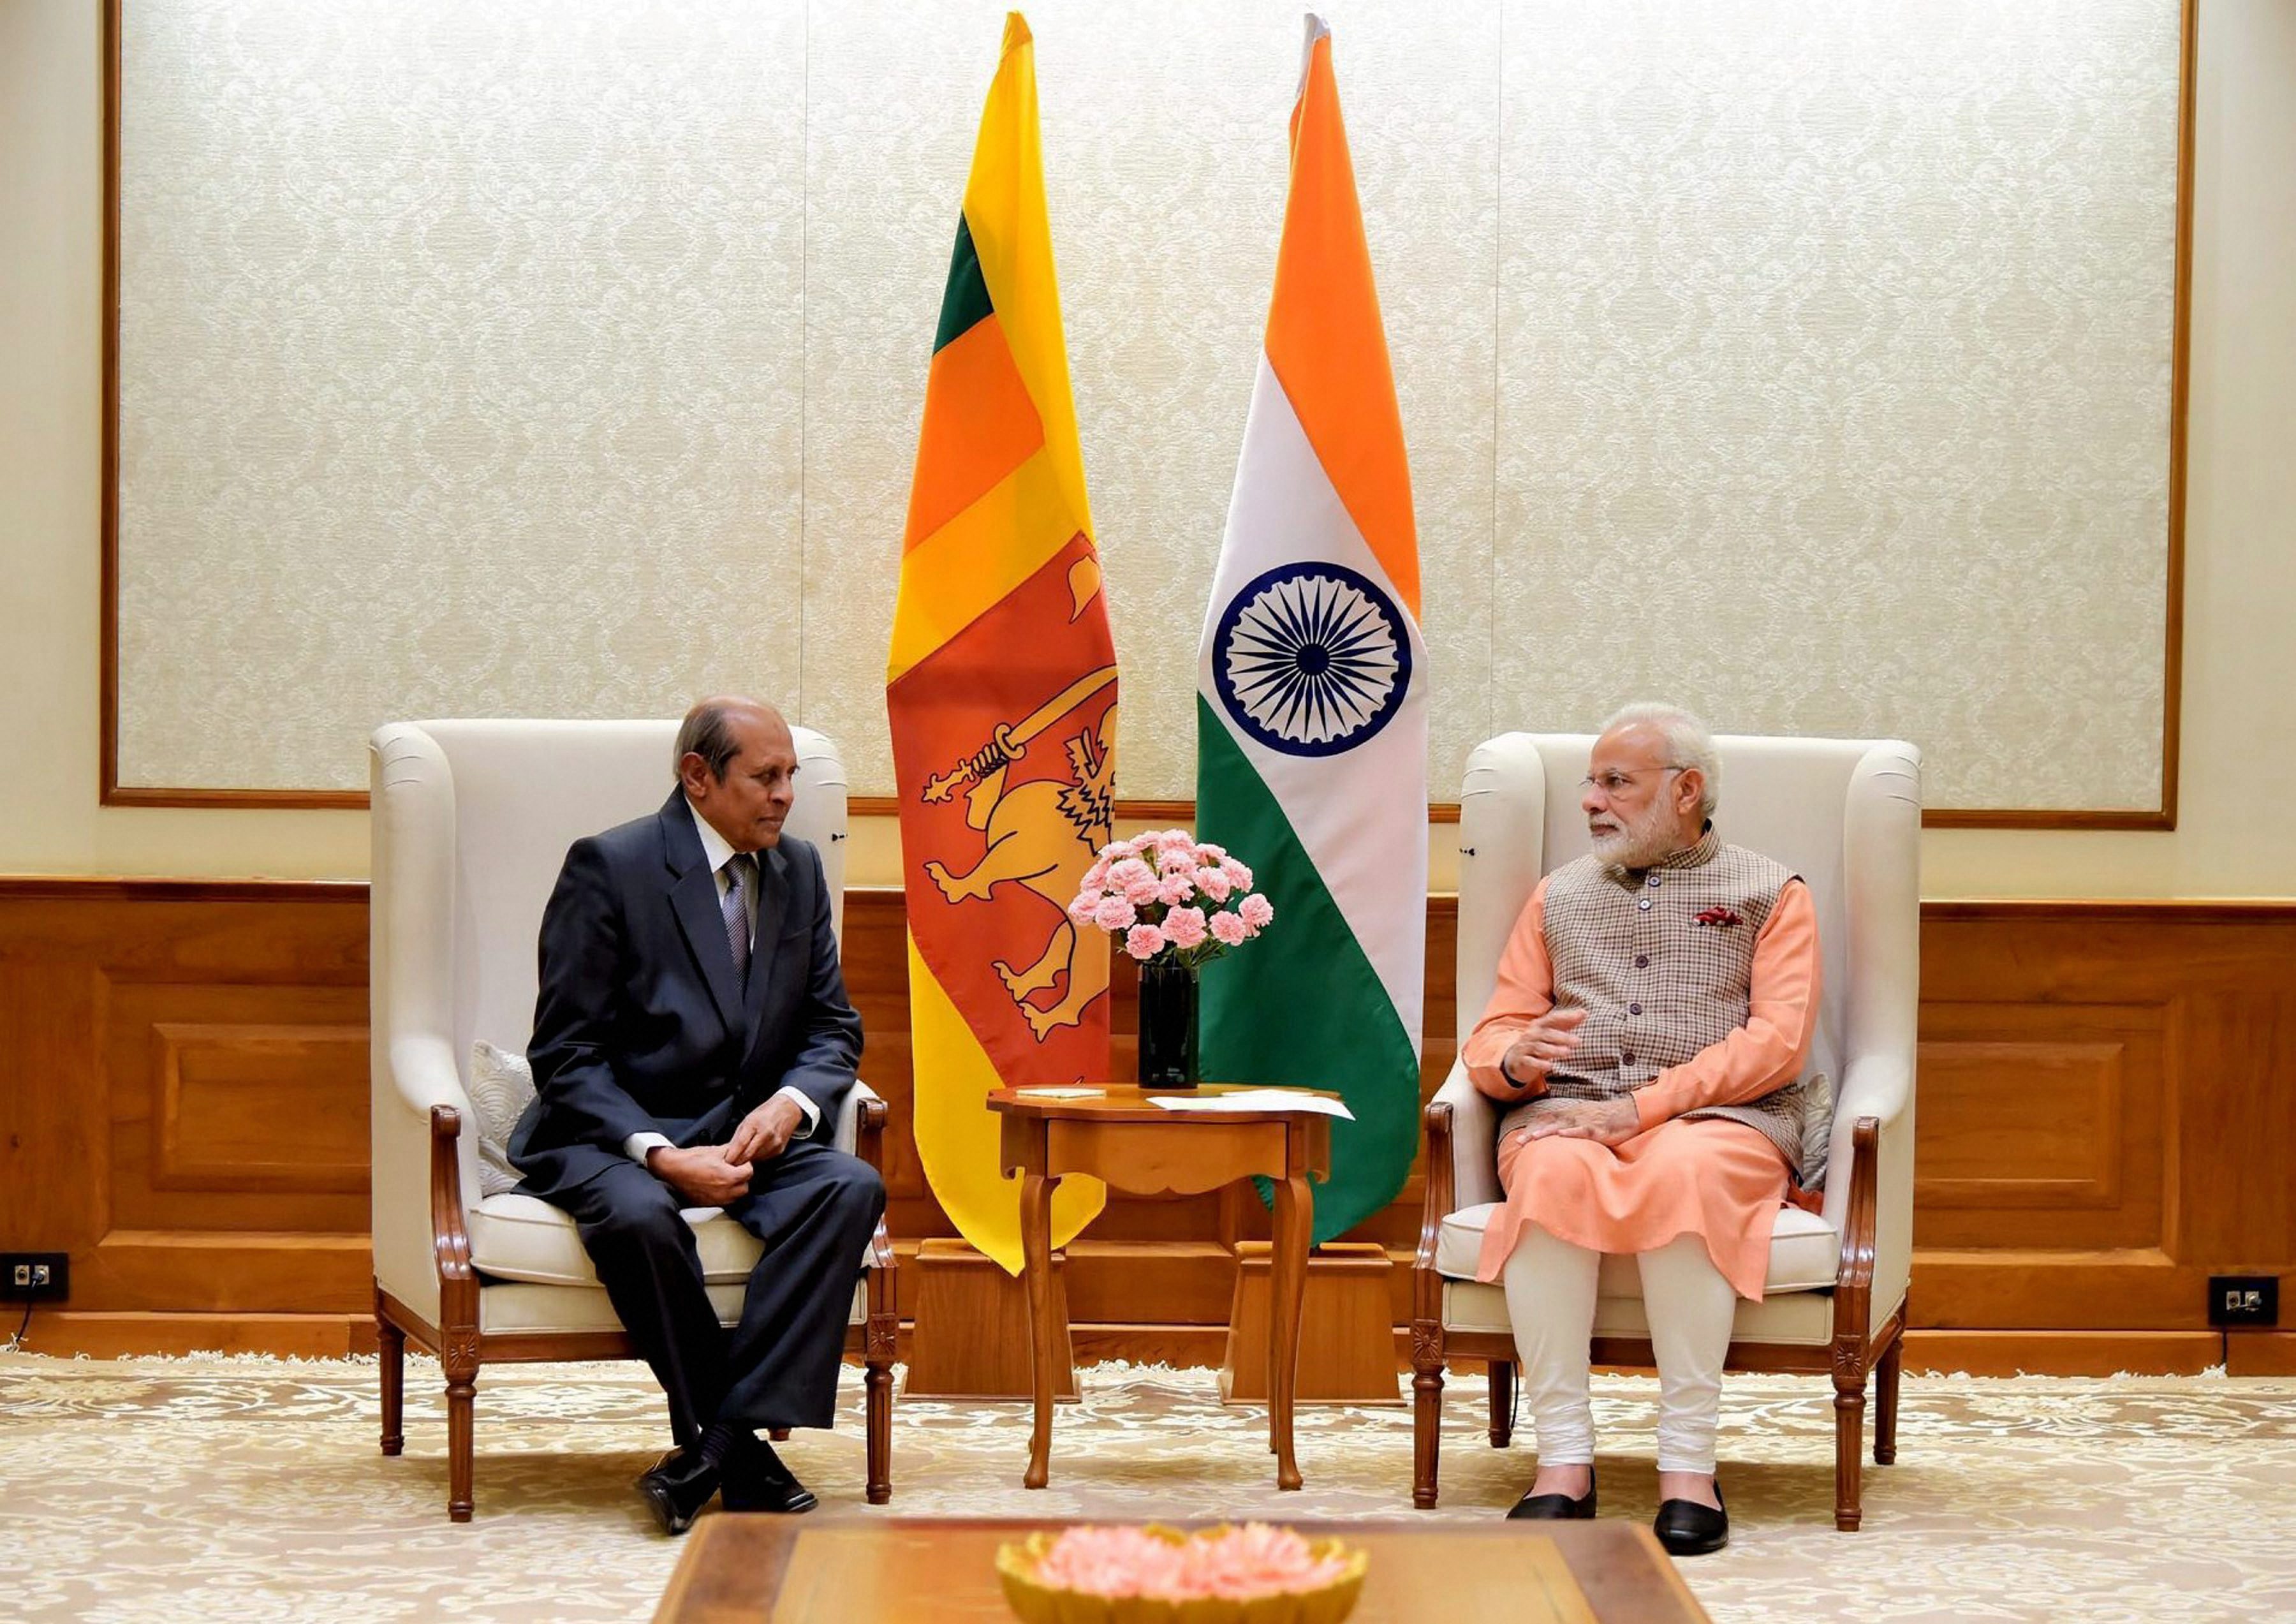 India attaches great importance to ties with Sri Lanka: Modi